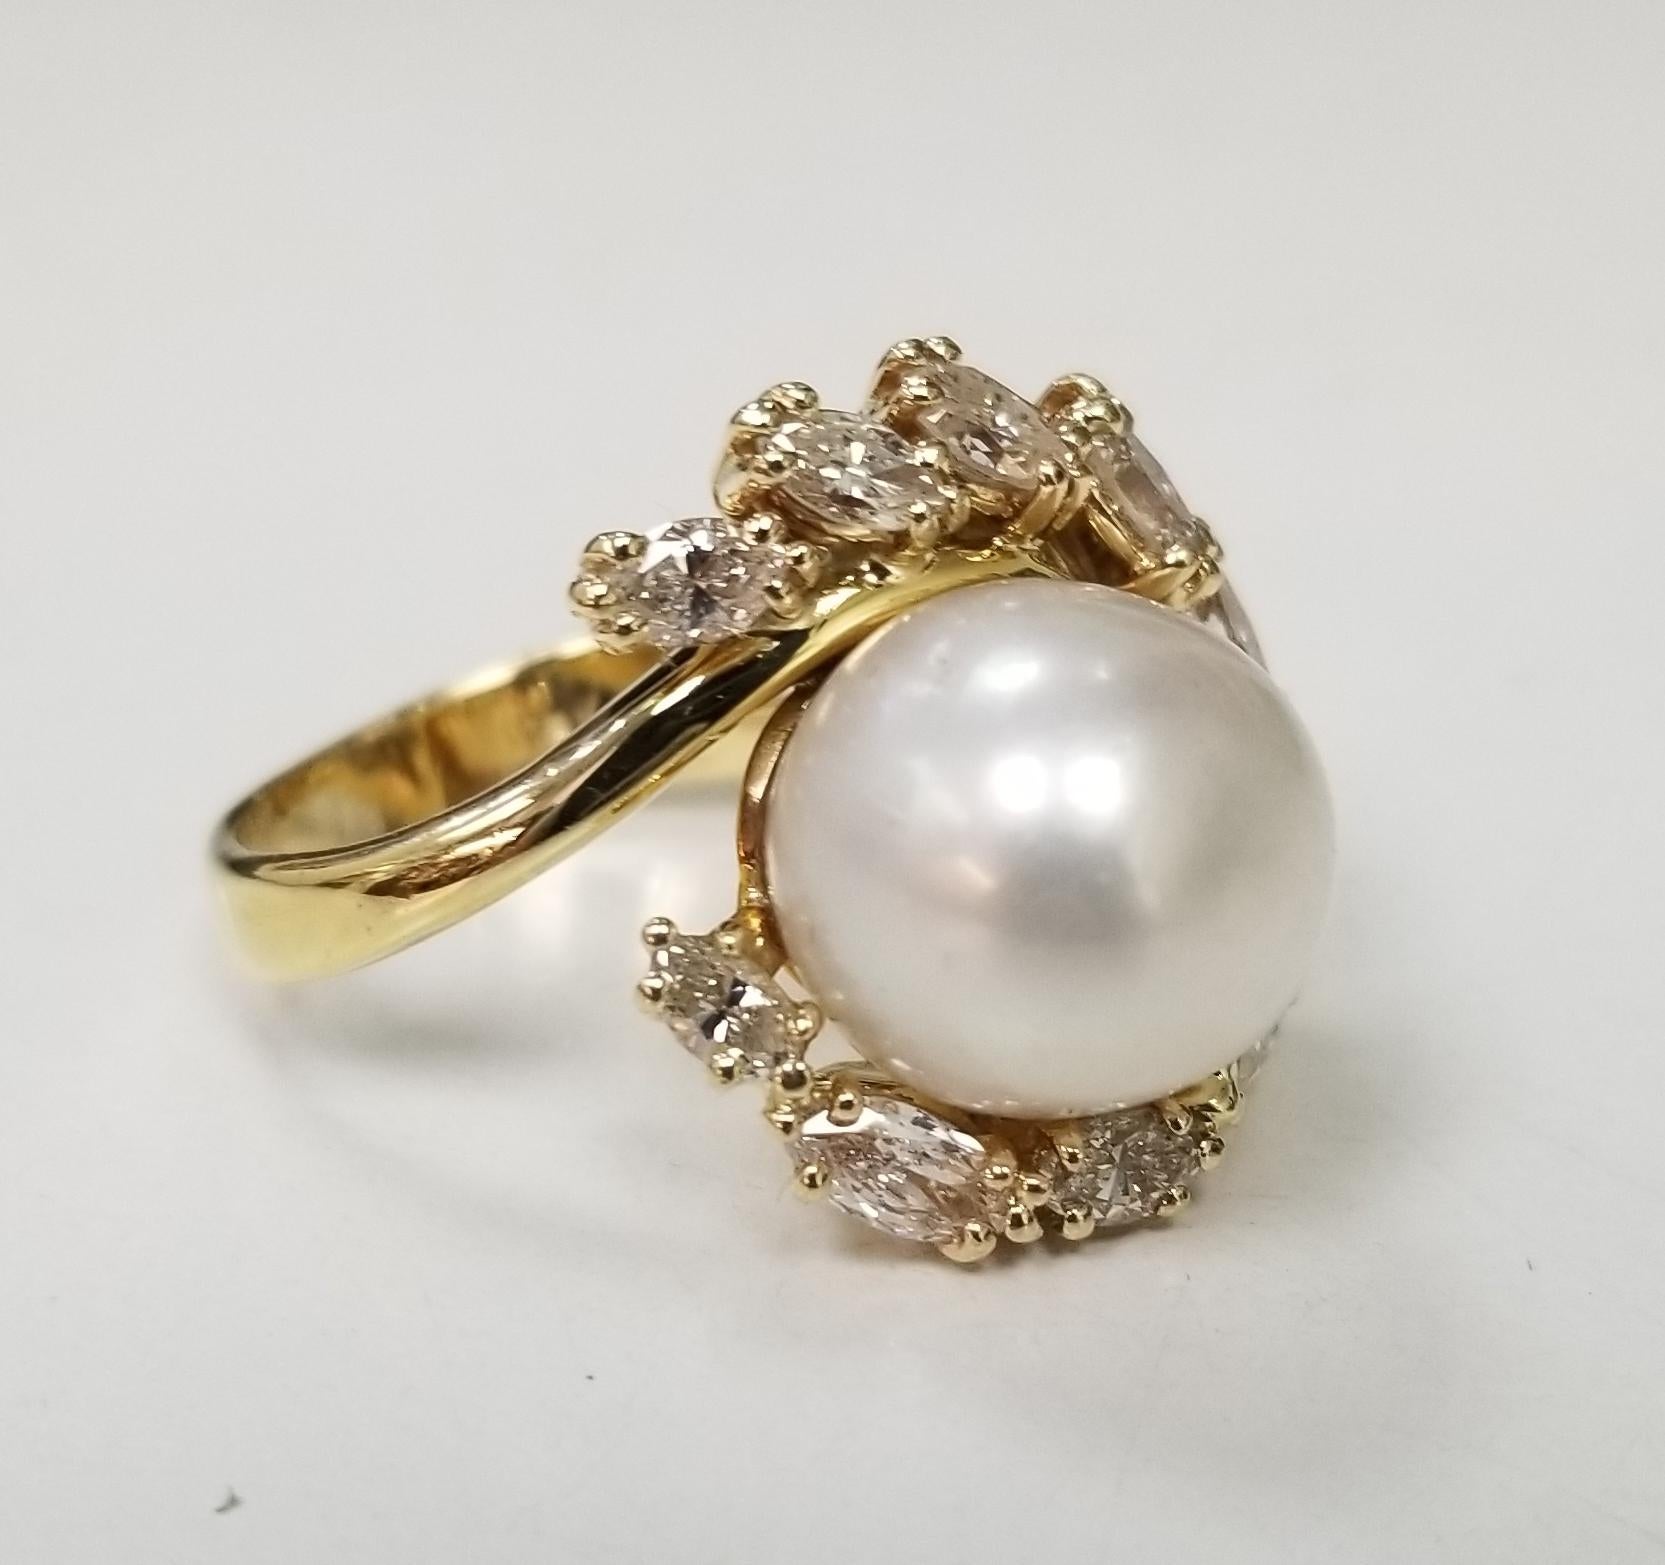 Gorgeous 18k yellow gold south sea pearl with marquise cut diamonds ring.
Specifications:
    main stone: 11.80 mm White South Sea Pearl
    diamonds: 10 marquise cut
    carat total weight: APPROX 1.50 CTW
    color: G
    clarity: VS1  
    metal: